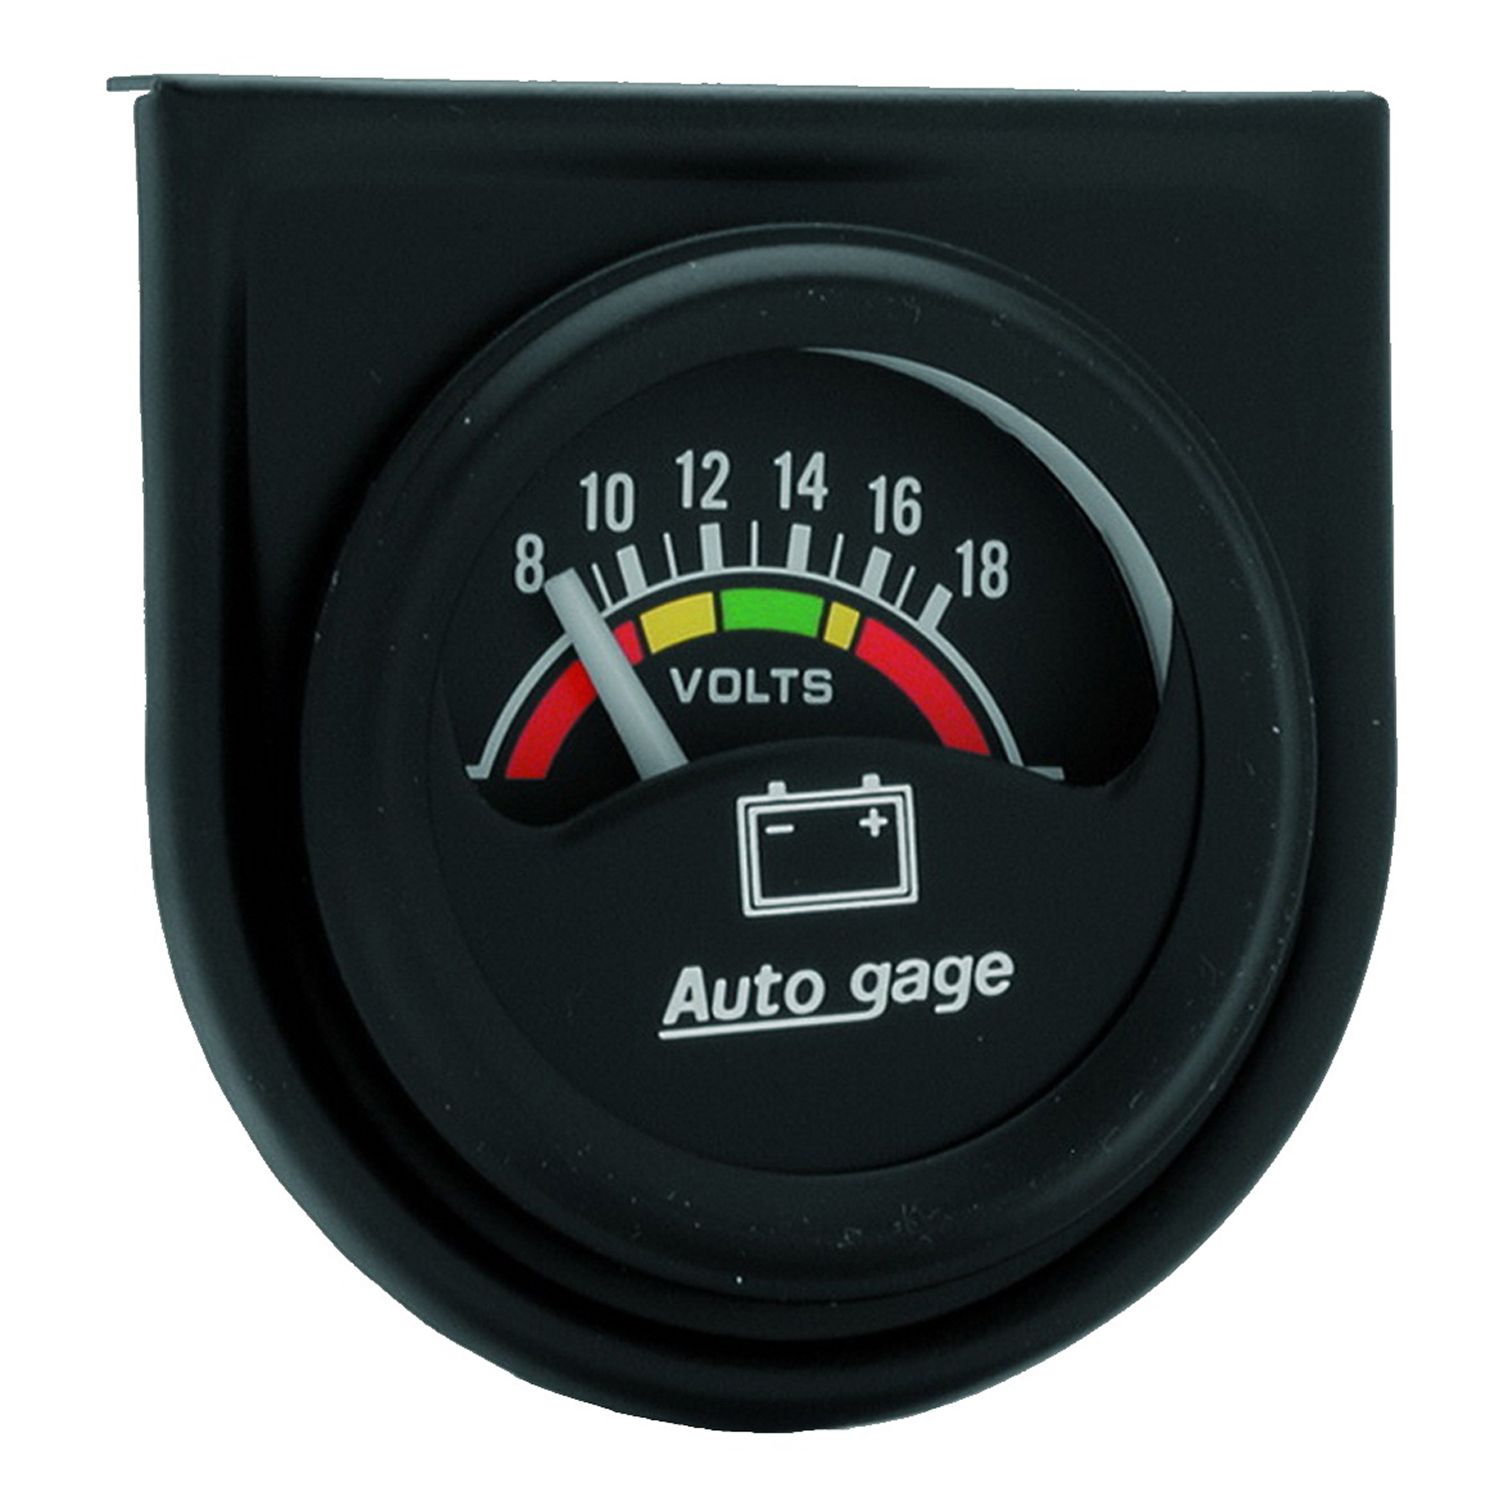 1-1/2 VOLTMETER, 8-18V, AIR-CORE, SHORT SWEEP, AUTO GAGE